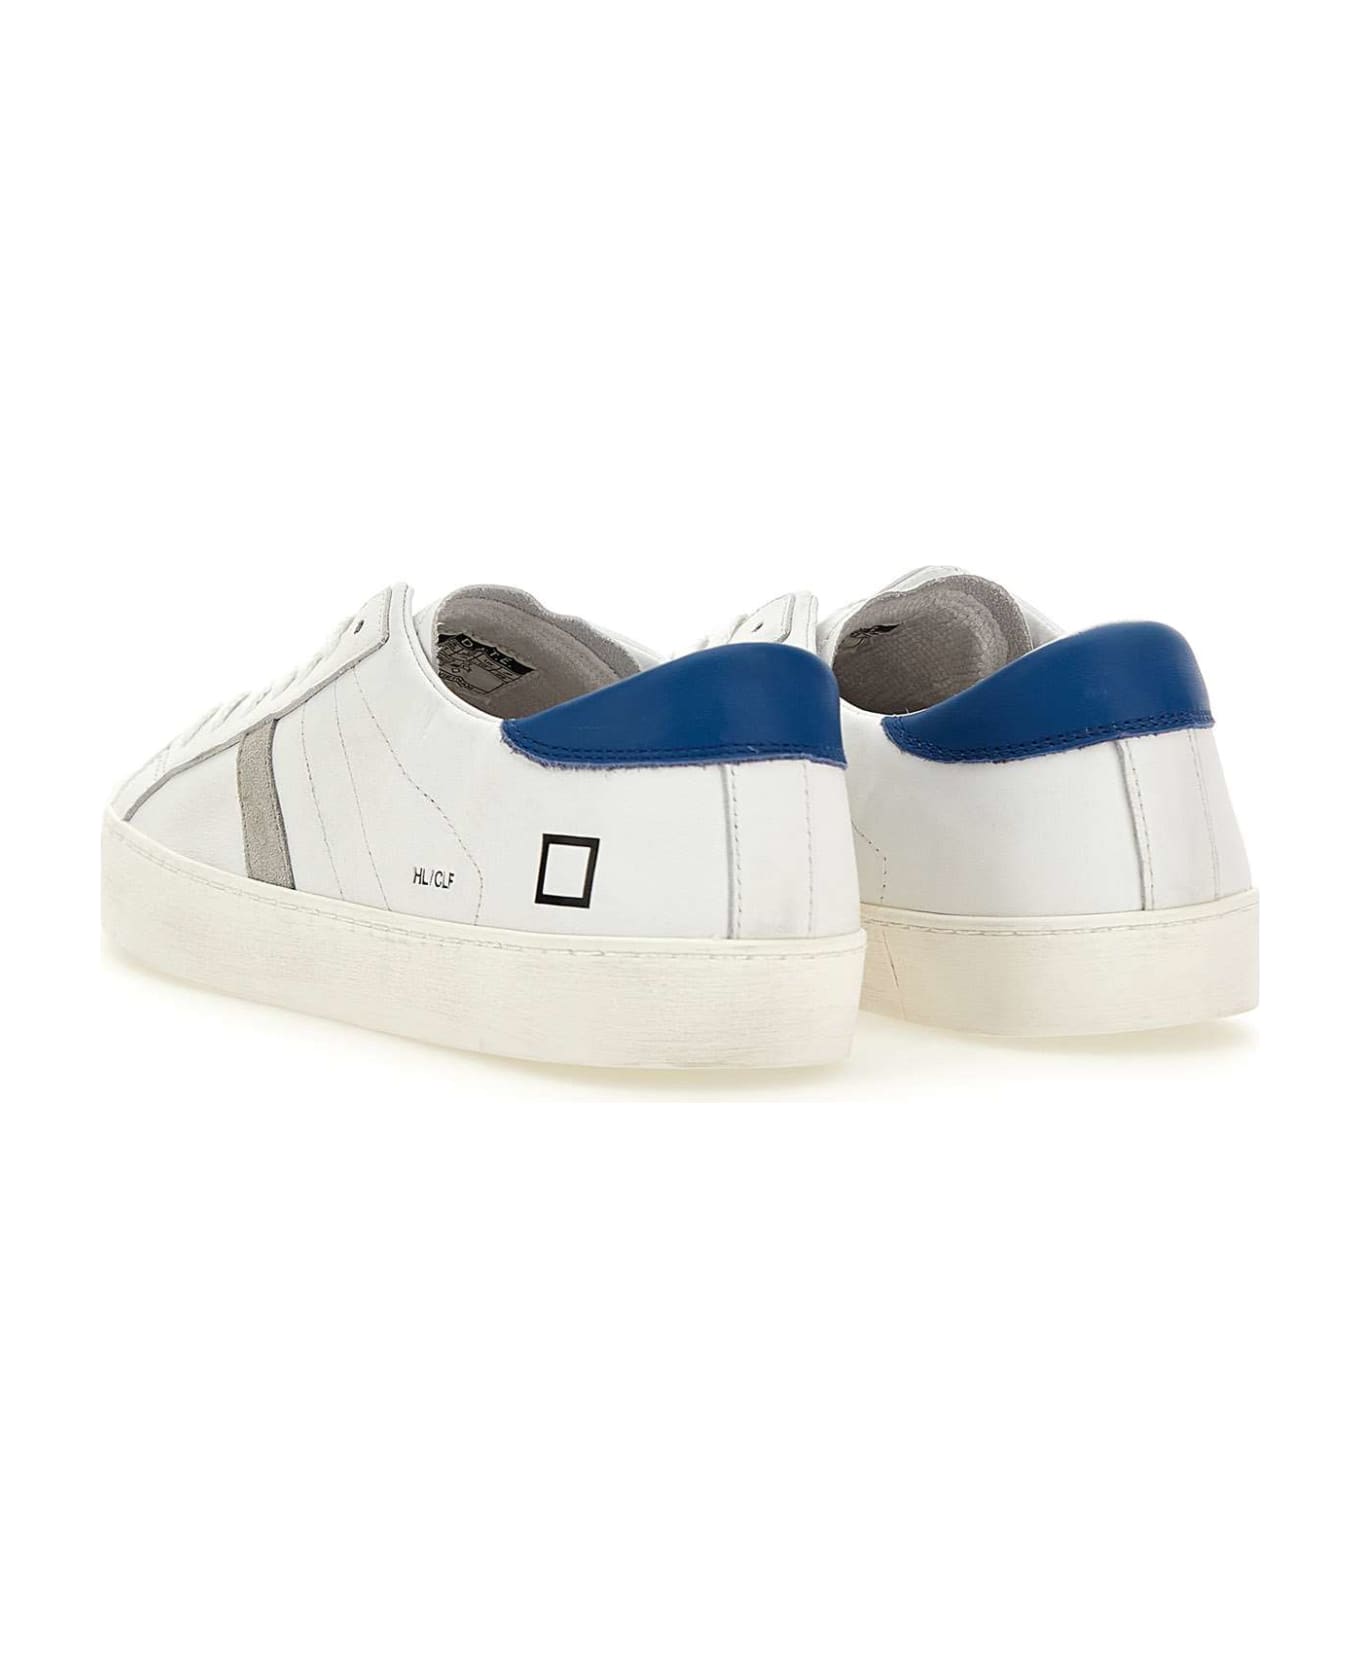 D.A.T.E. "hillow Calf" Leather Sneakers - WHITE